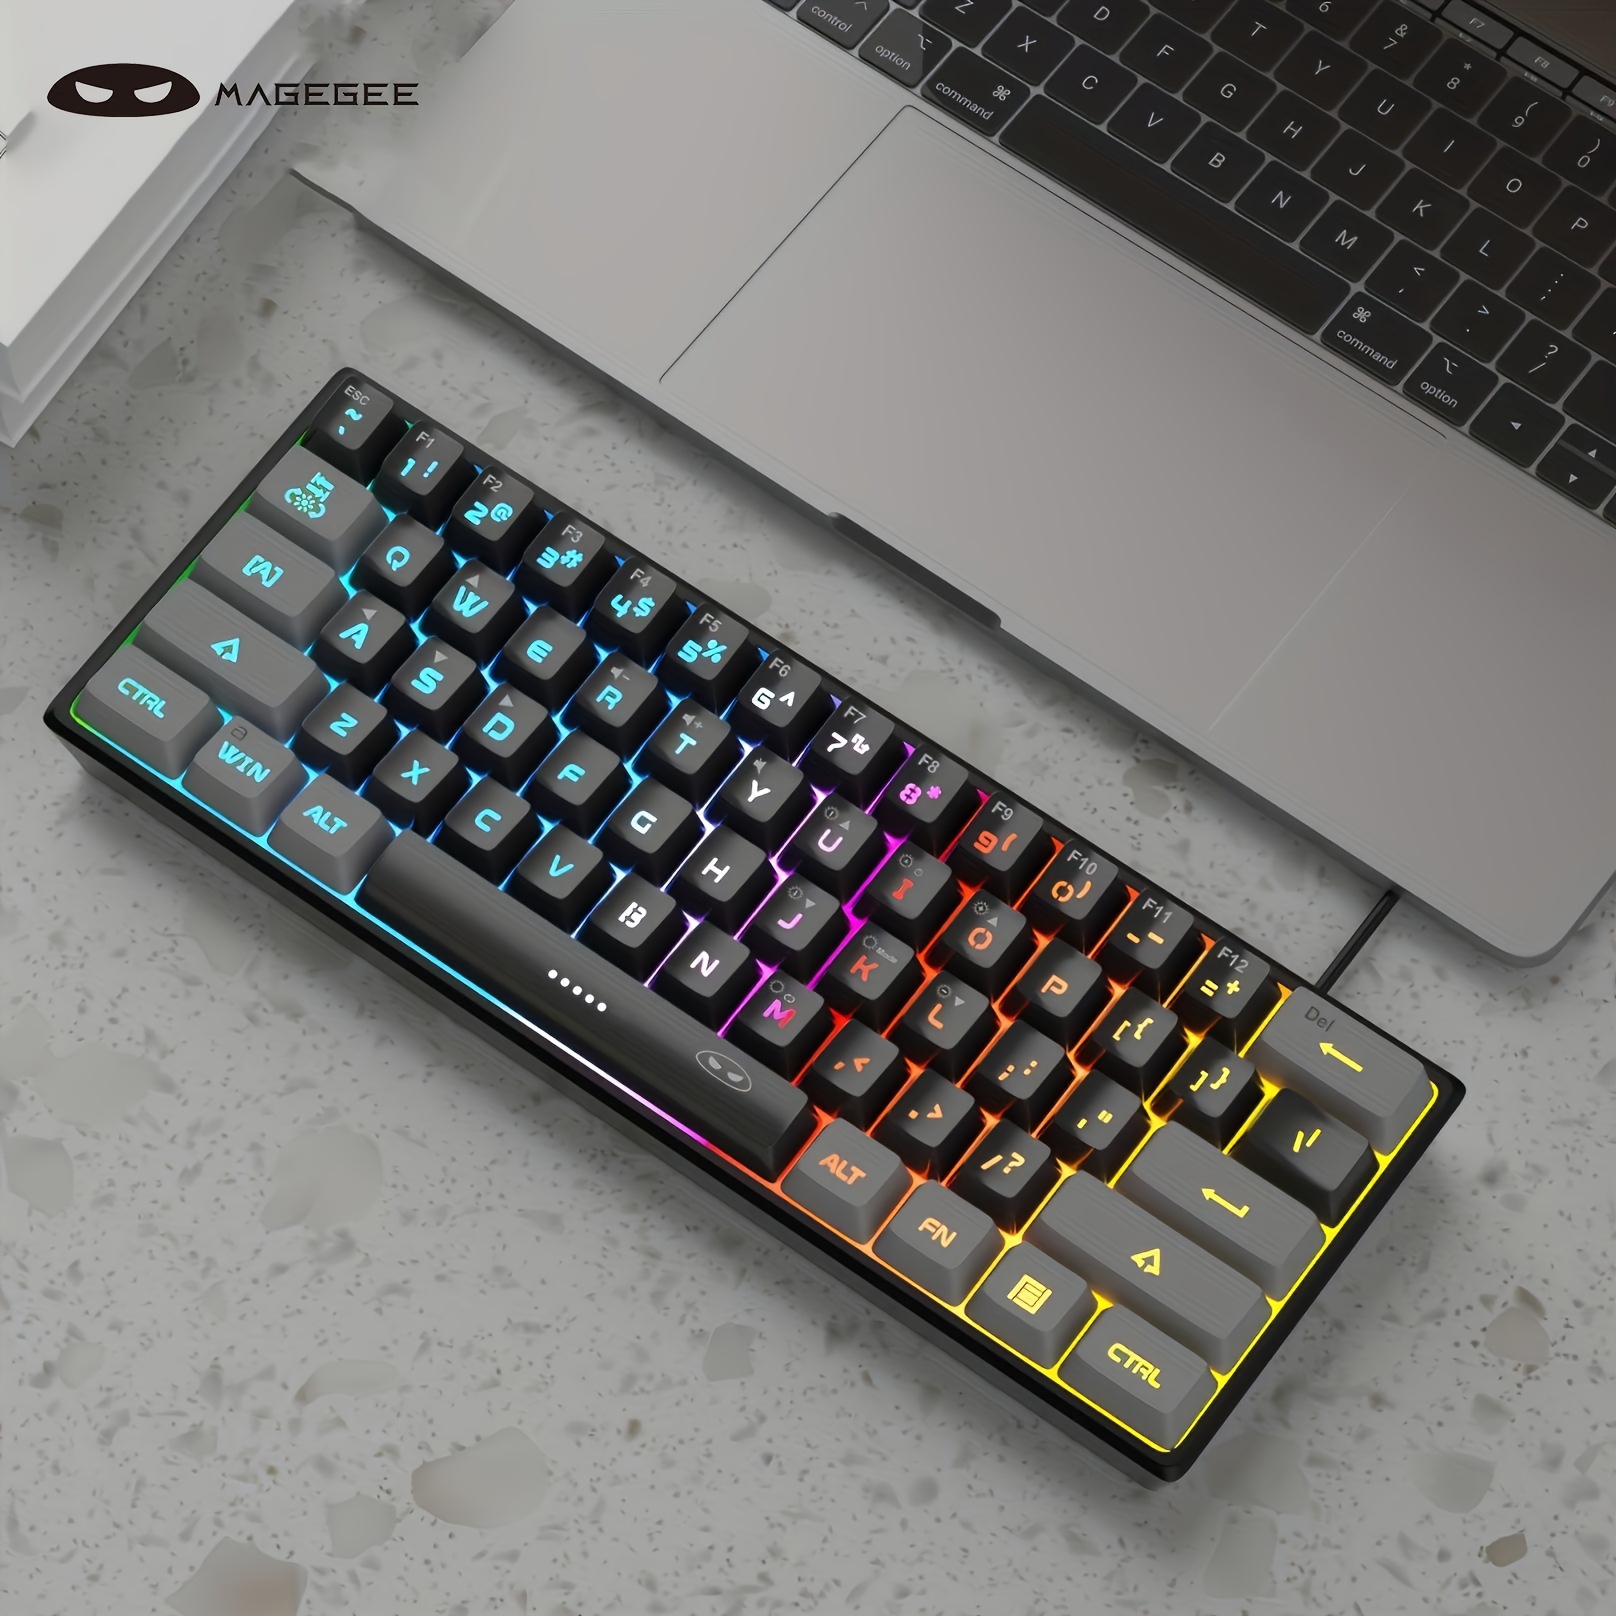 

Magegee Ts91 Mini 60% Gaming/office Keyboard, Waterproof Keycap Type Wired Rgb Backlit Compact Computer Keyboard For Windows//laptop